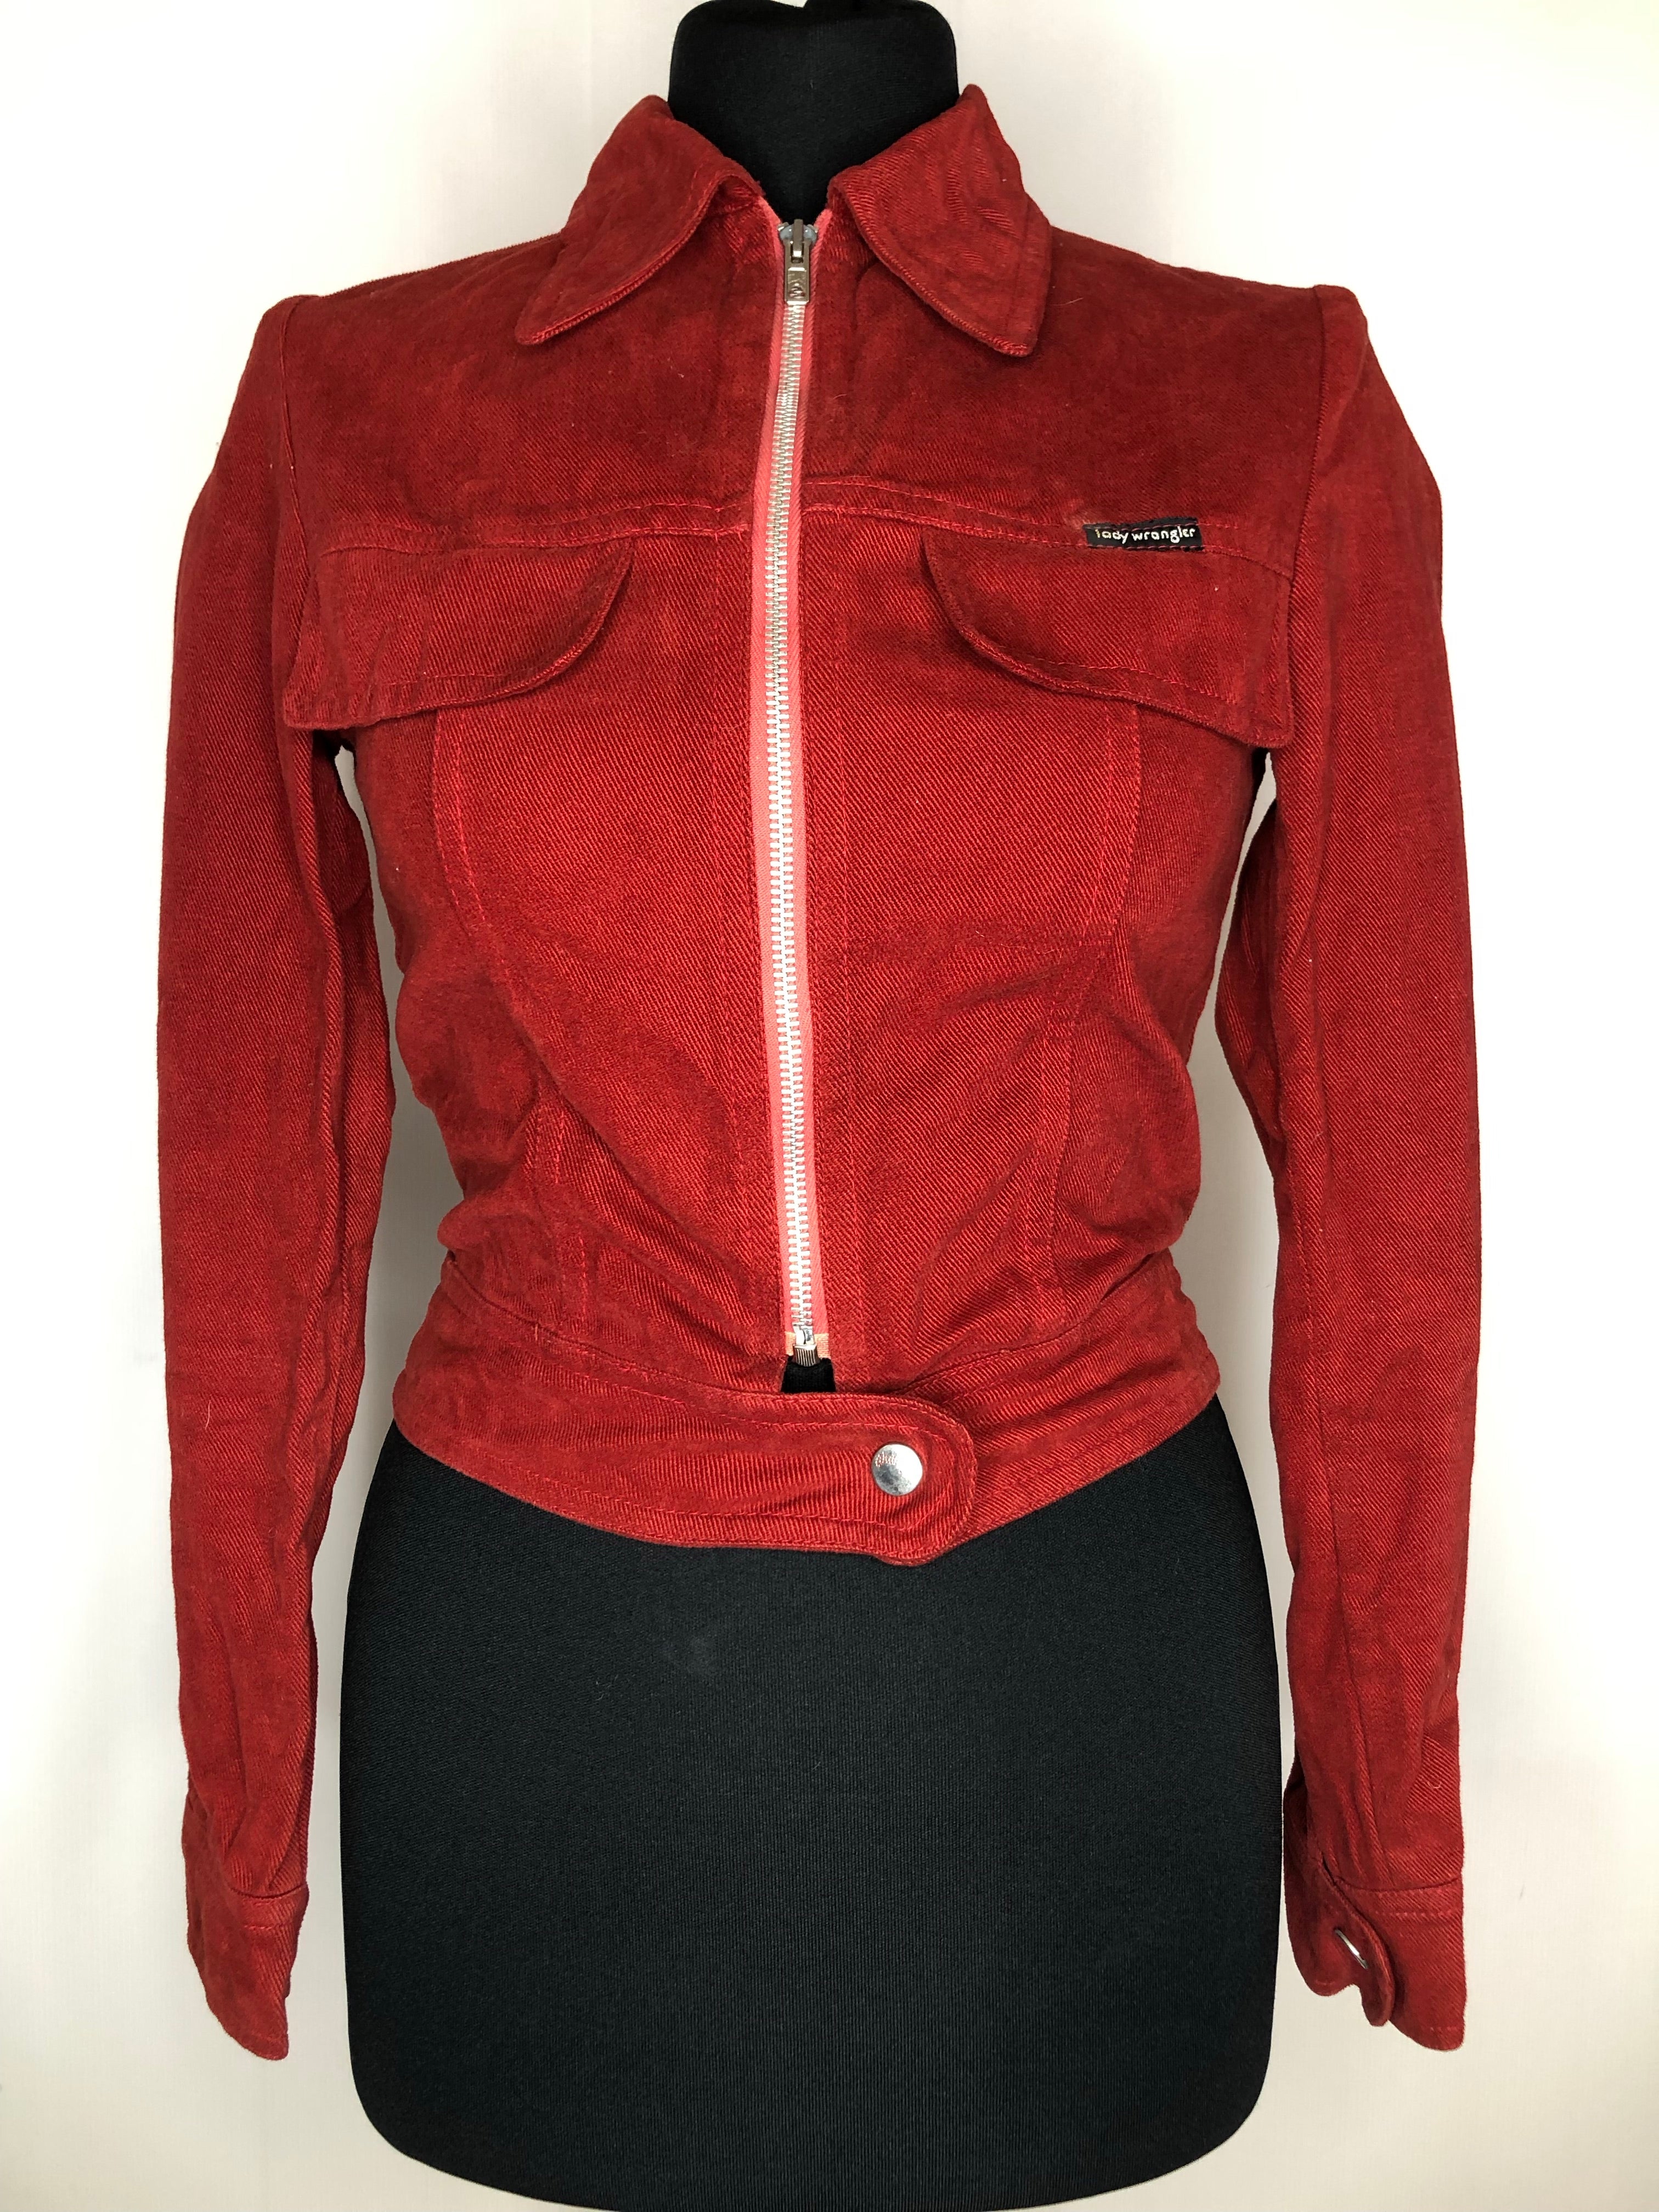 Rare 1970s Cropped Jacket by Lady Wrangler in Red - Size UK 6-8